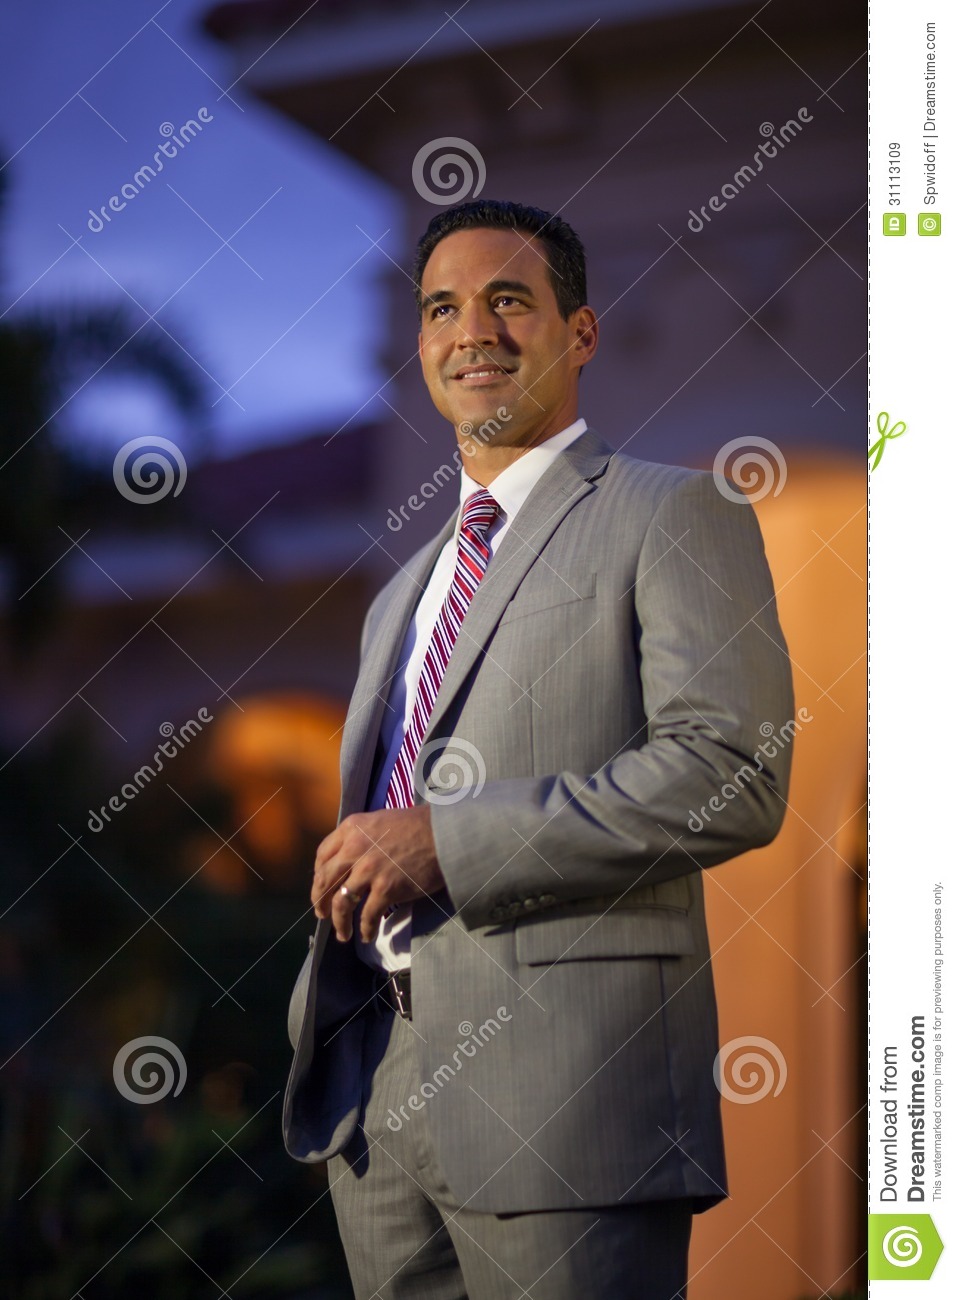 Hispanic Man In Suit And Tie Outside Royalty Free Stock Images   Image